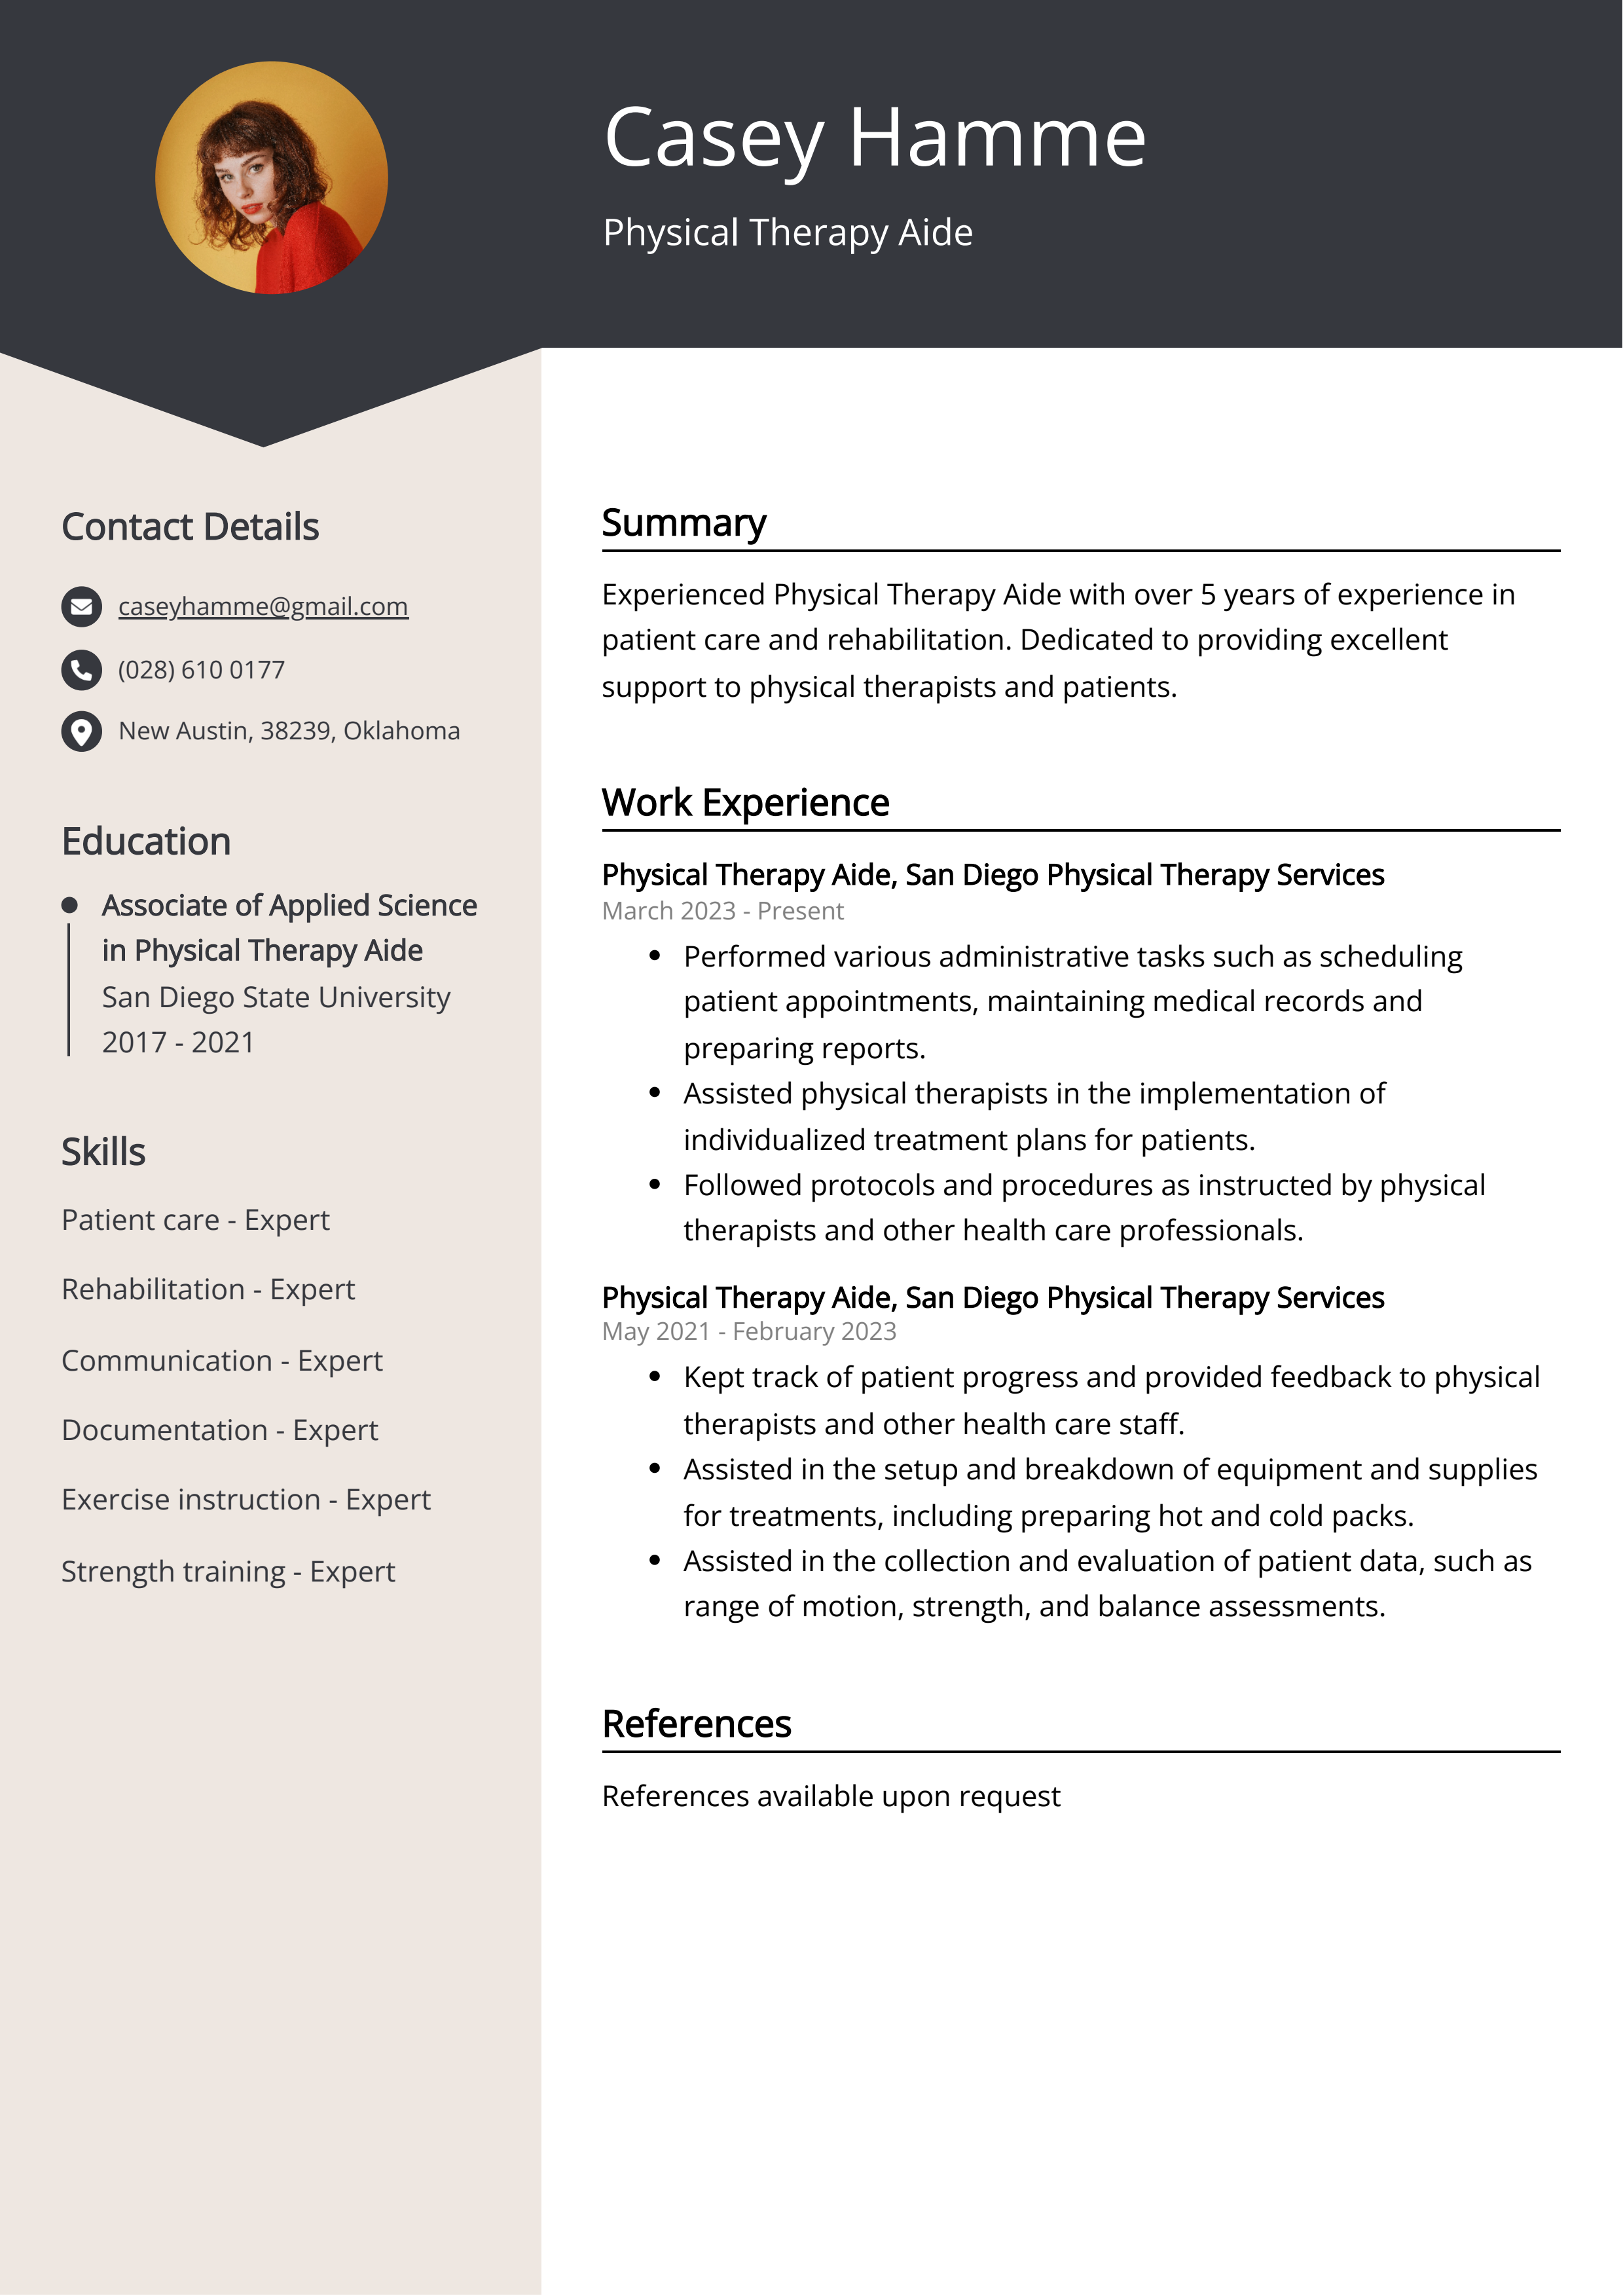 Physical Therapy Aide CV Example